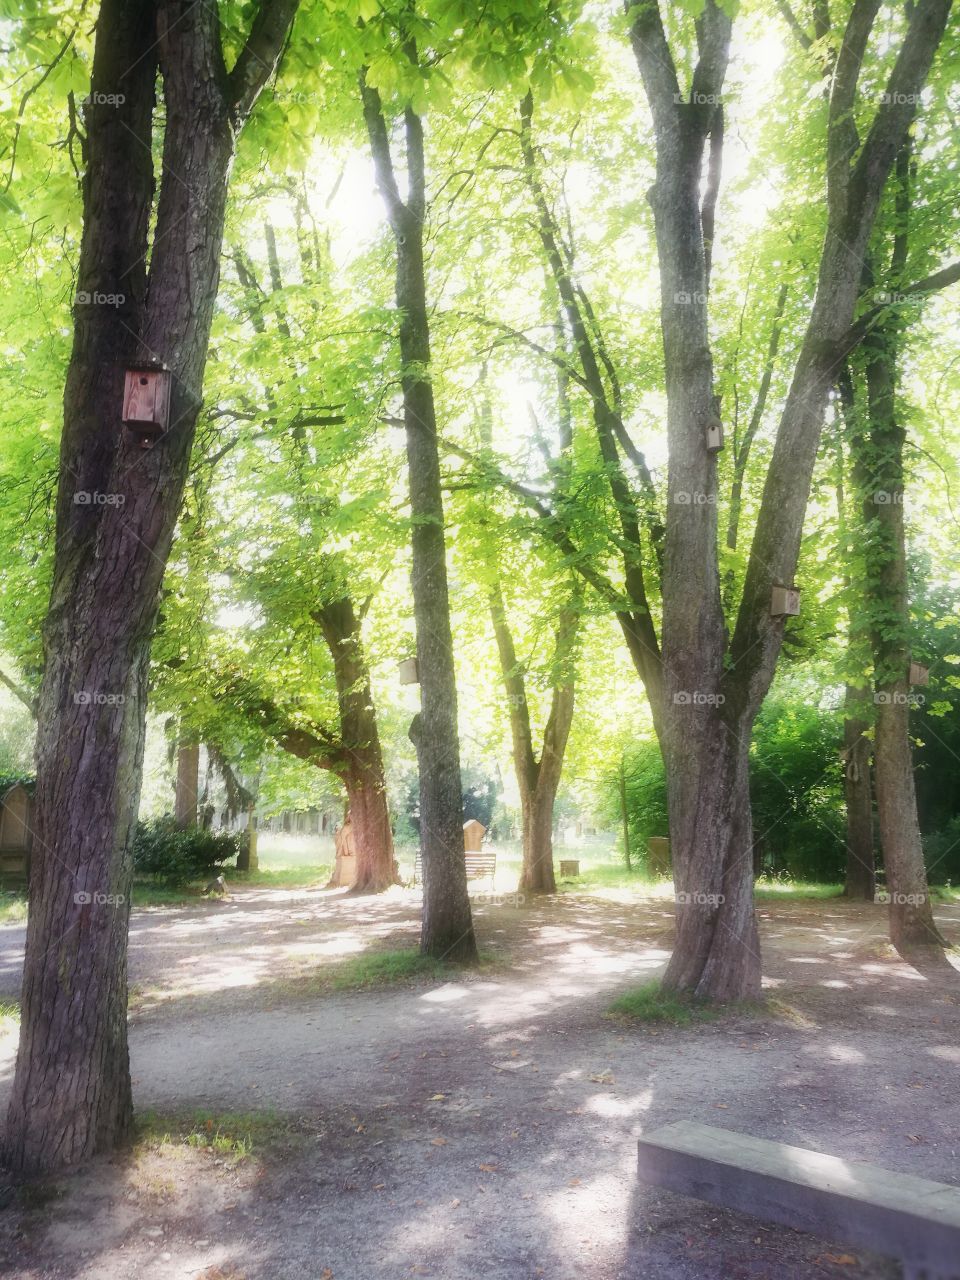 Chestnut trees in a park/ old cementry